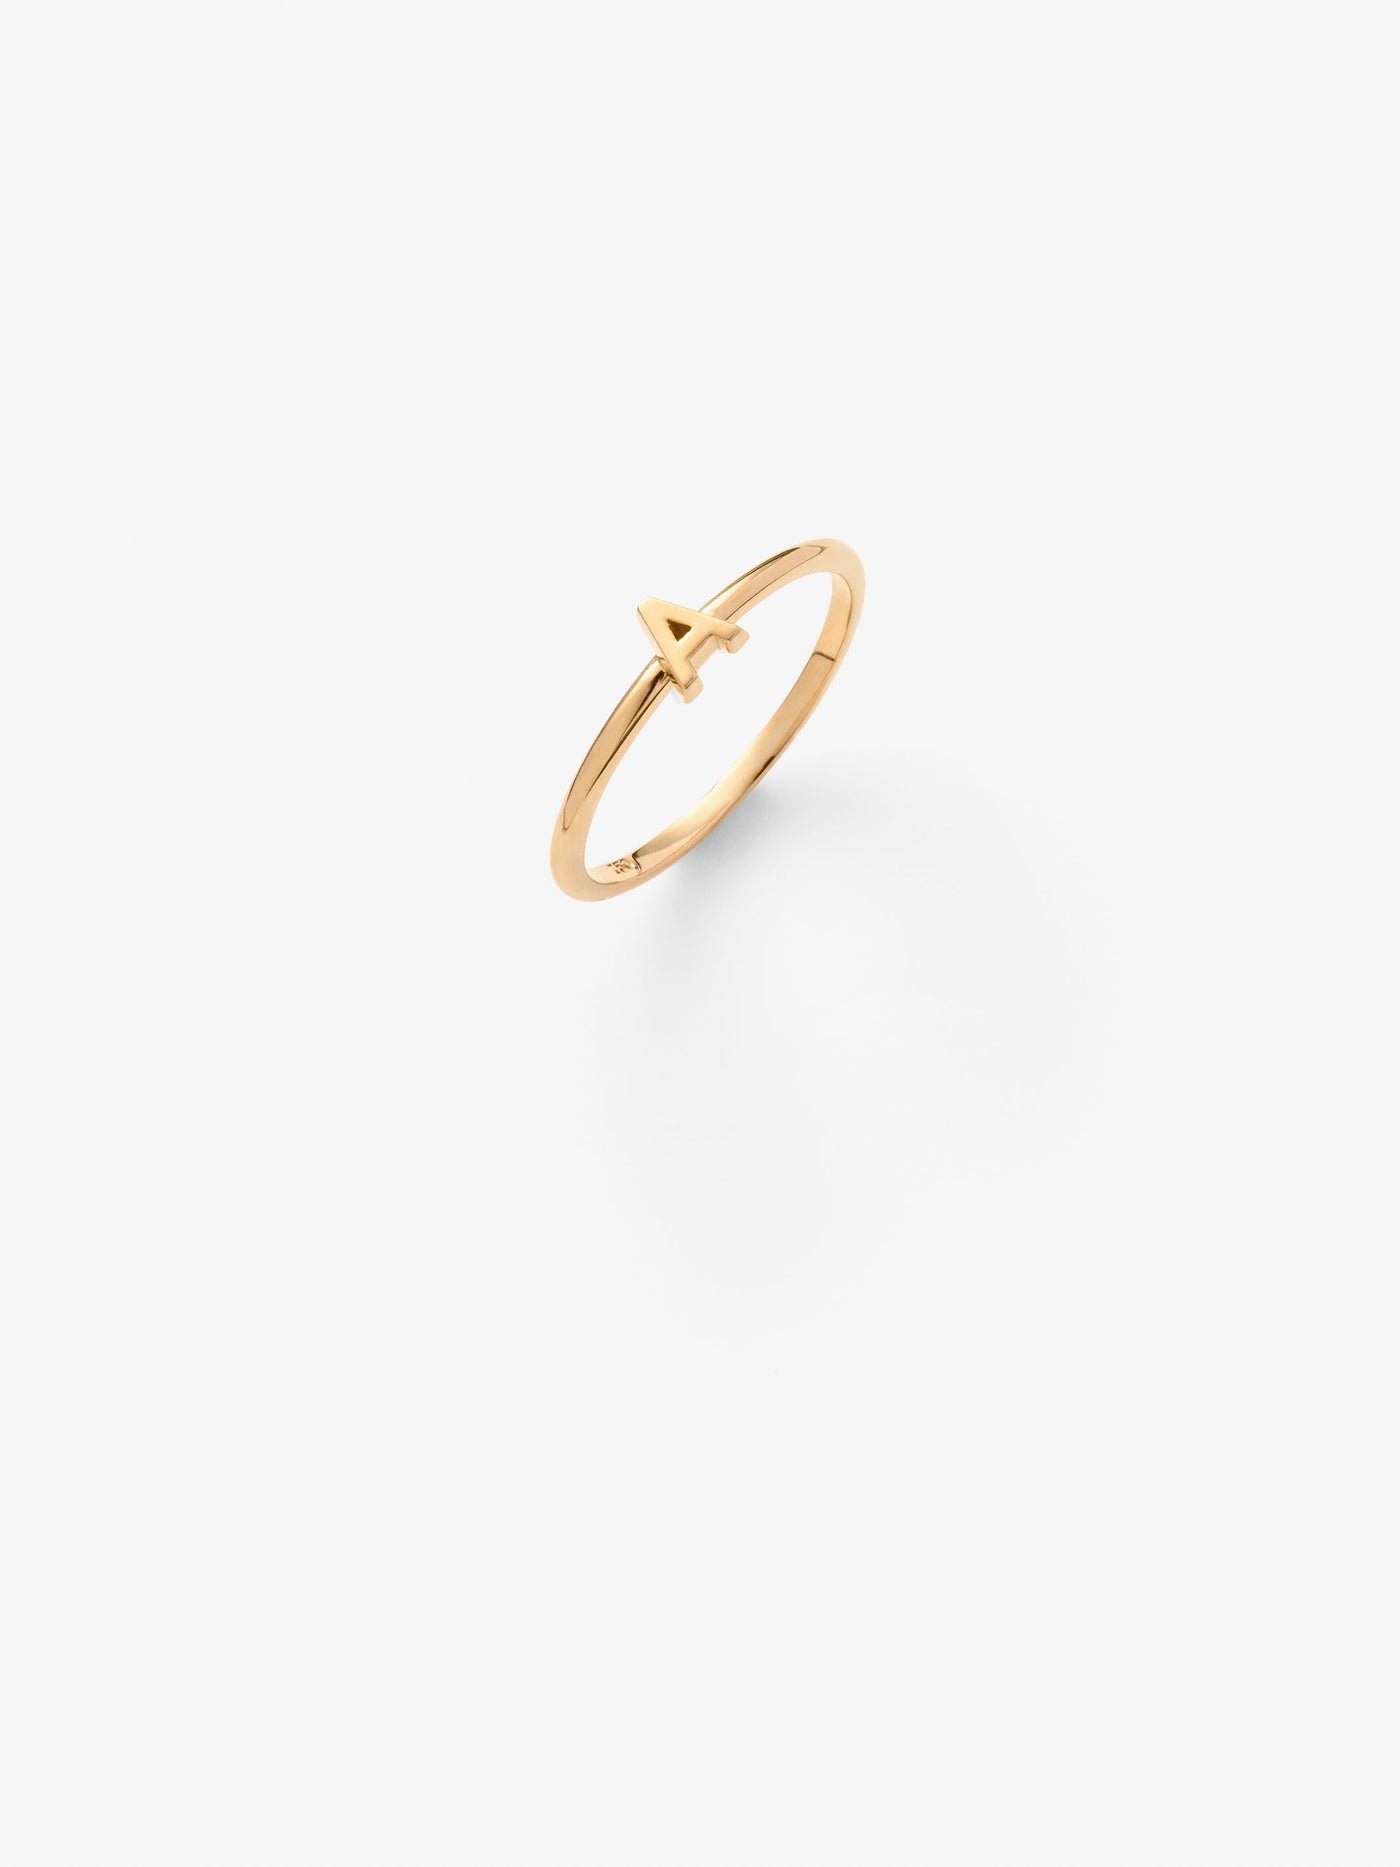 Verse-Fine-Jewellery-One-Letter-Gold-Pinky-Ring